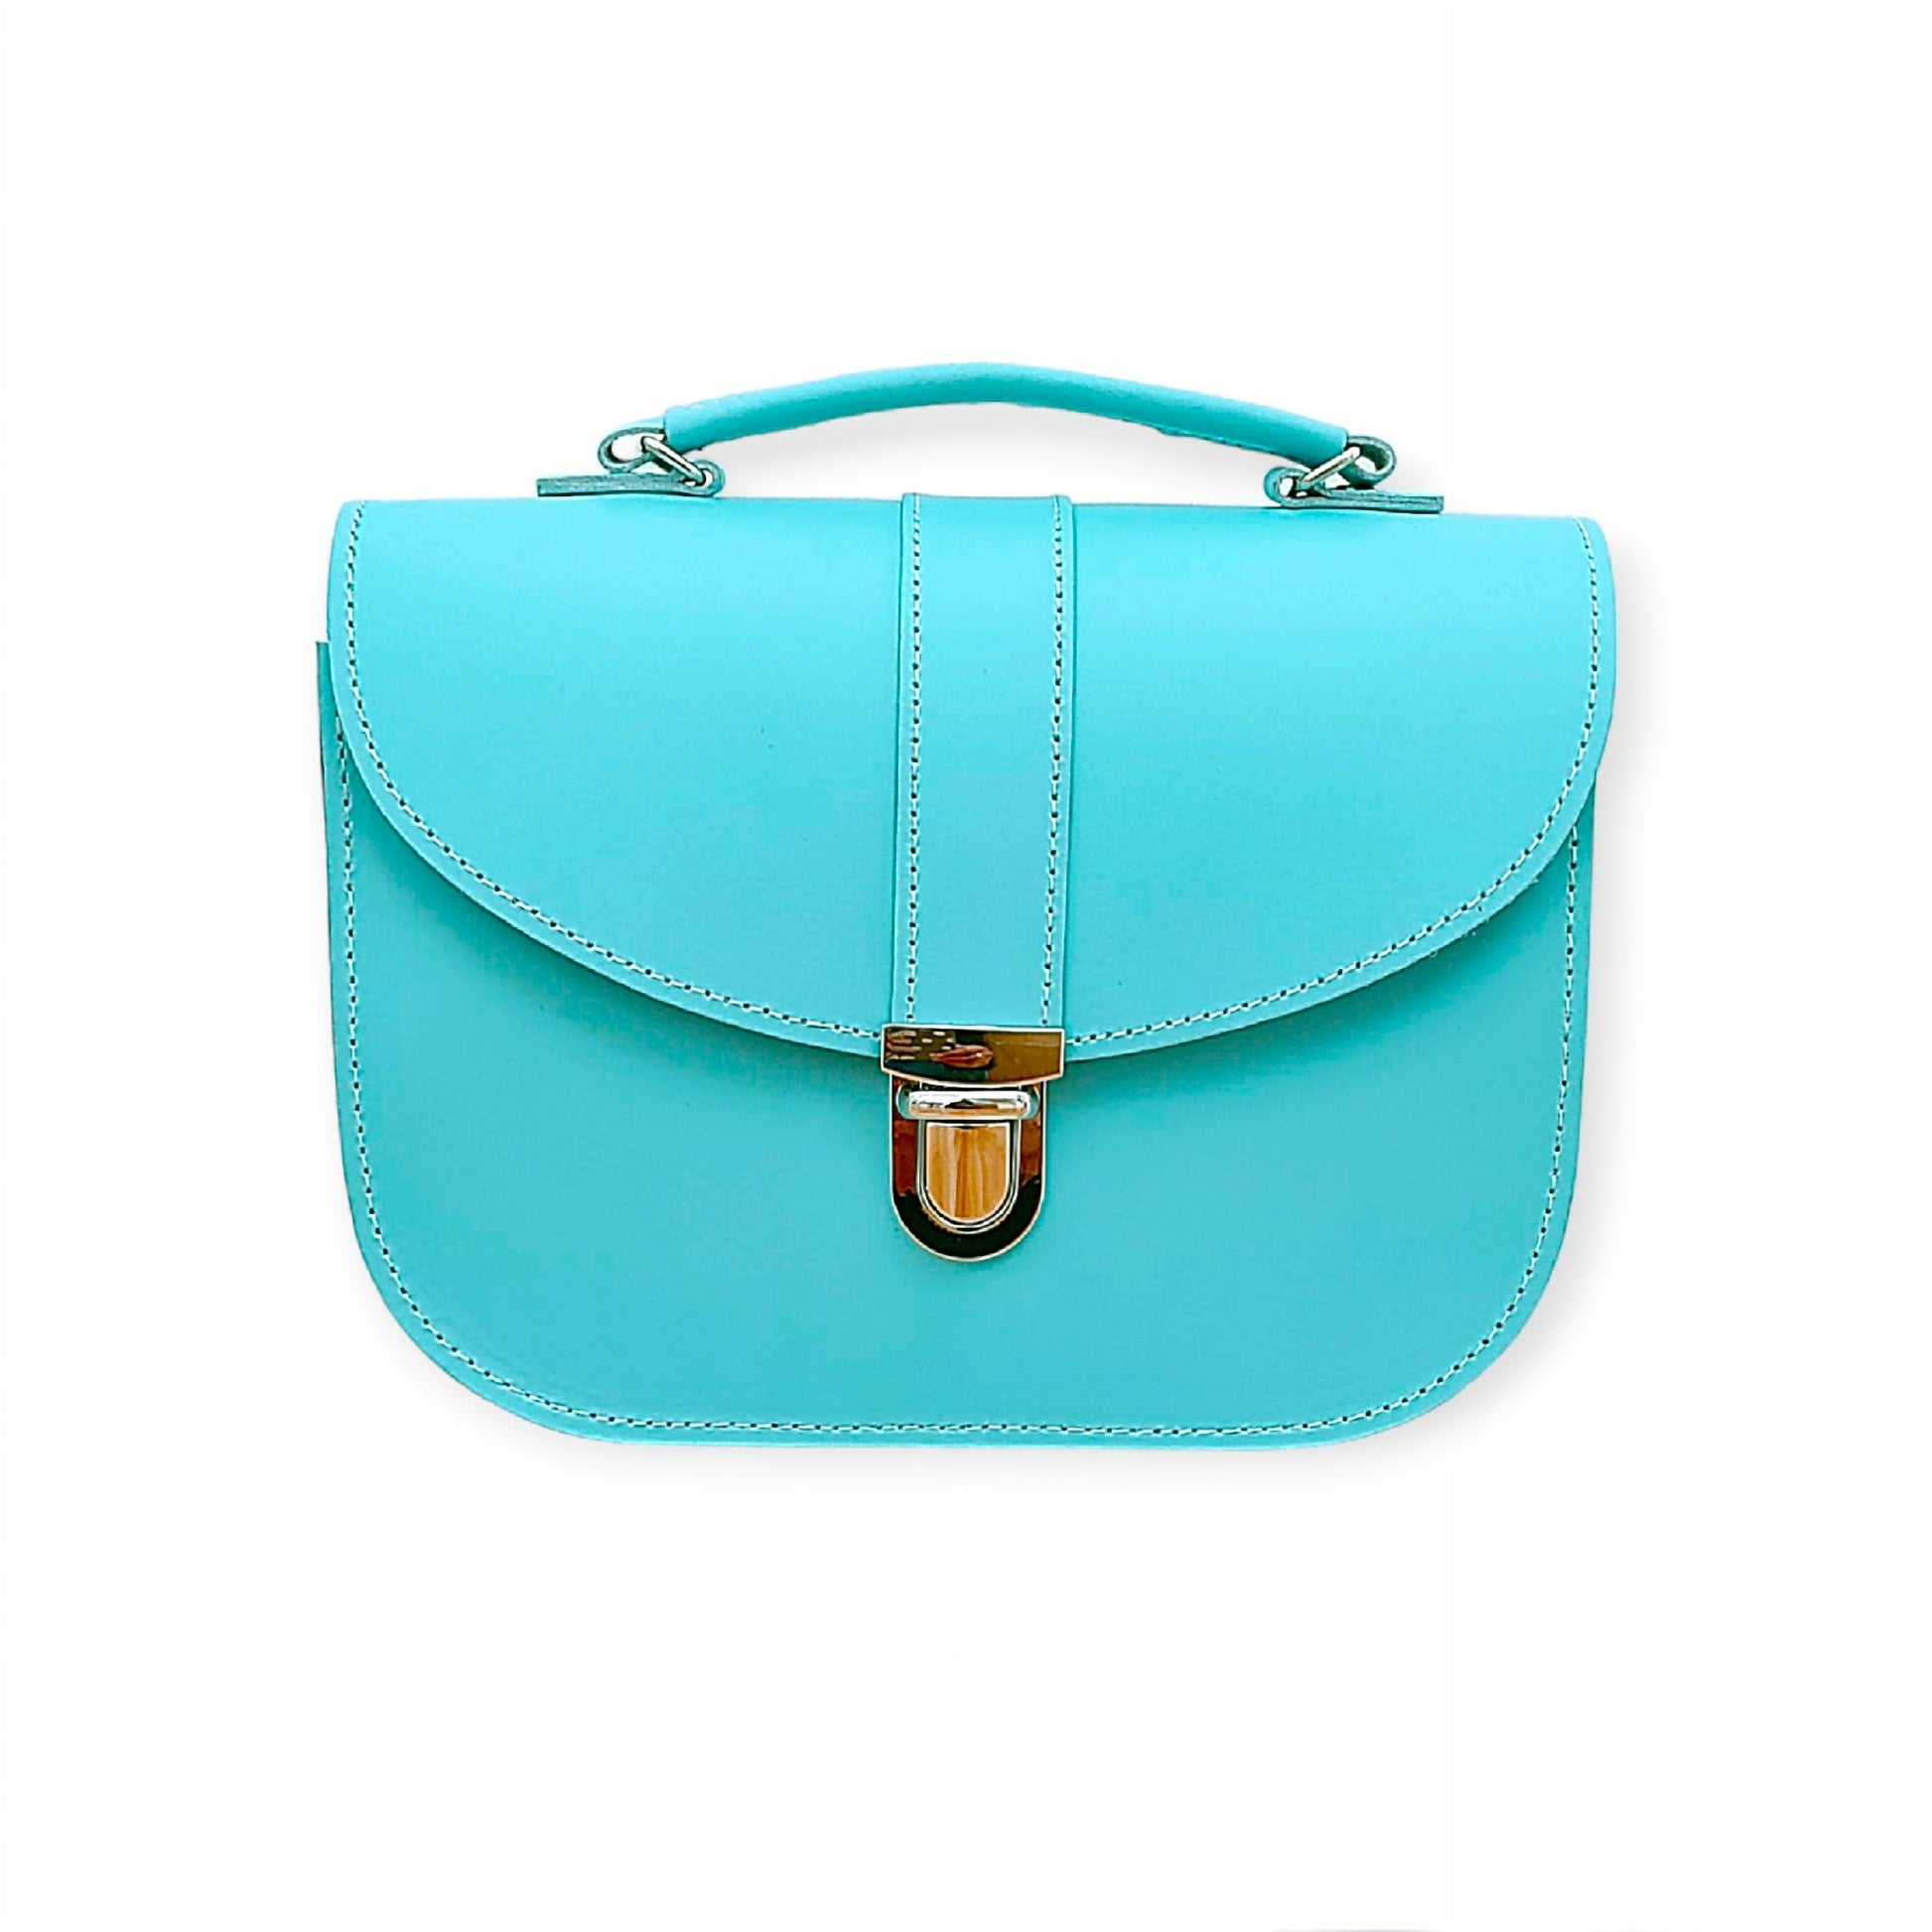 Olympia Handmade Leather Bag - Limpet - Shell Blue-0